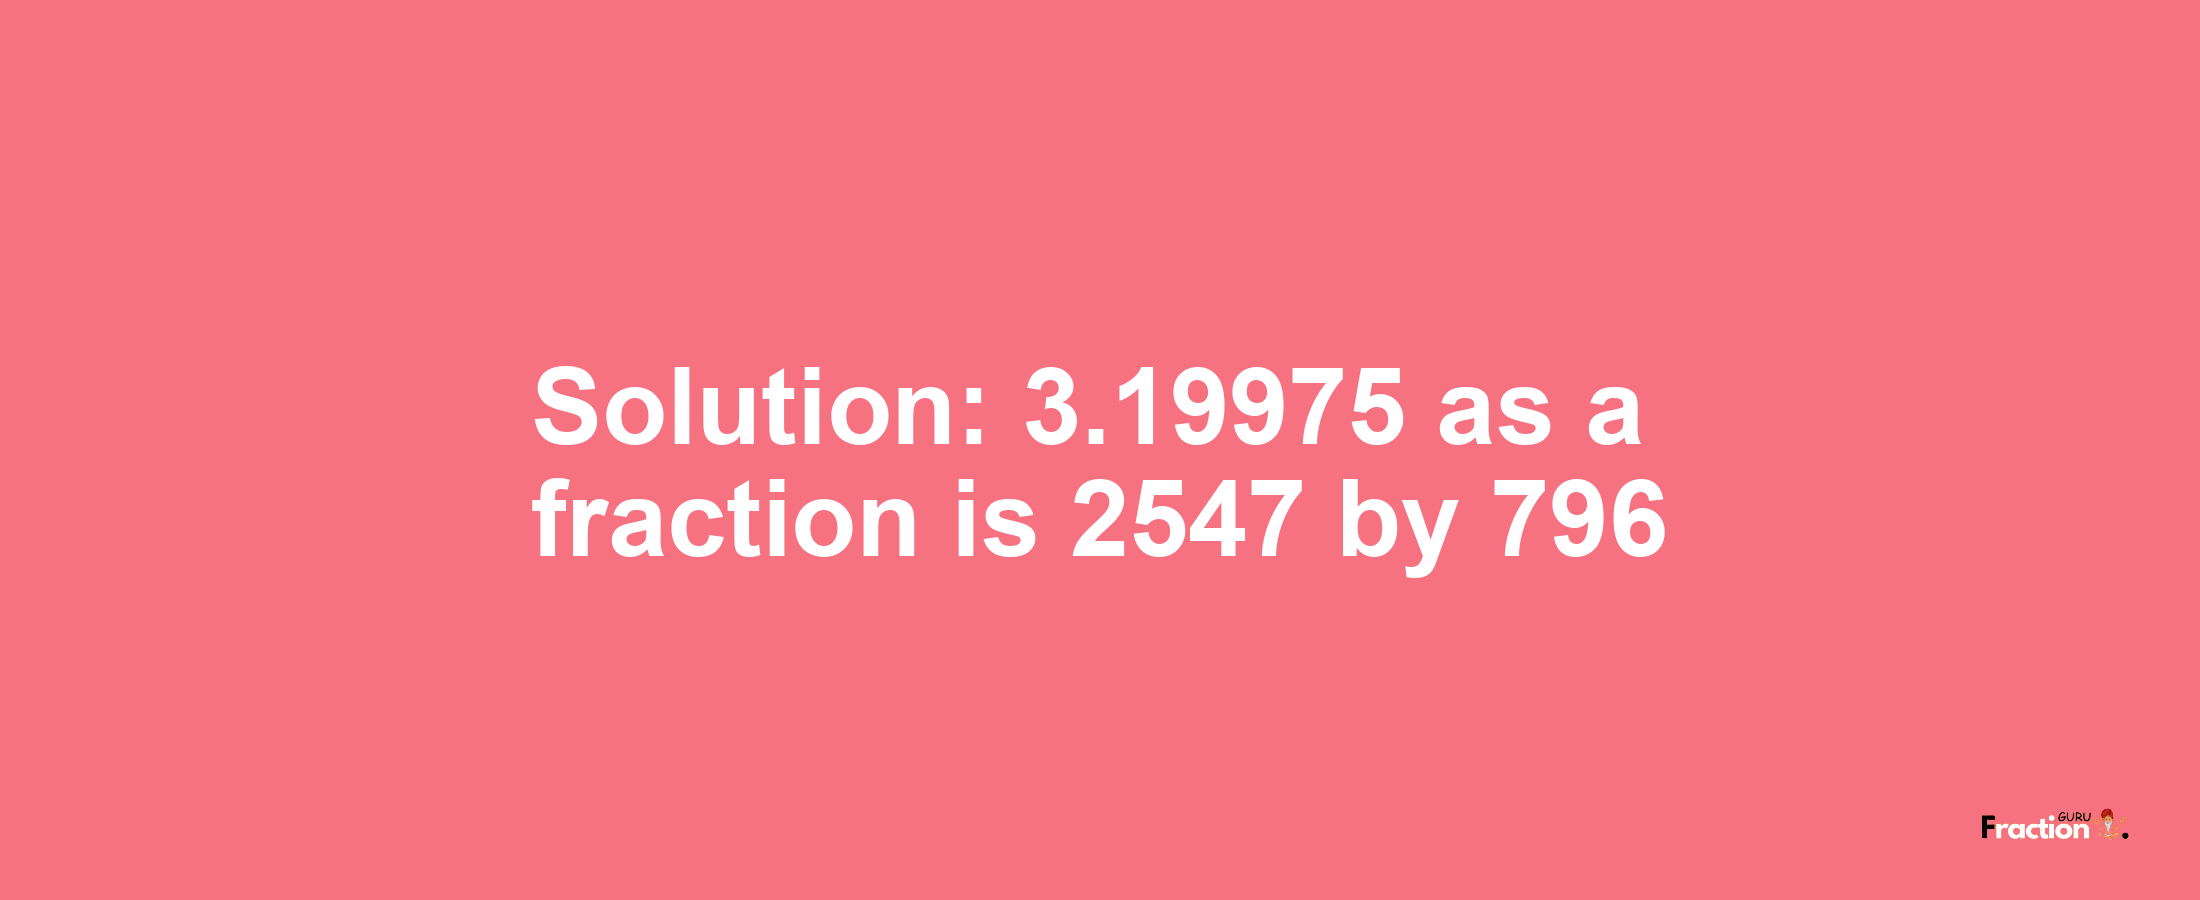 Solution:3.19975 as a fraction is 2547/796